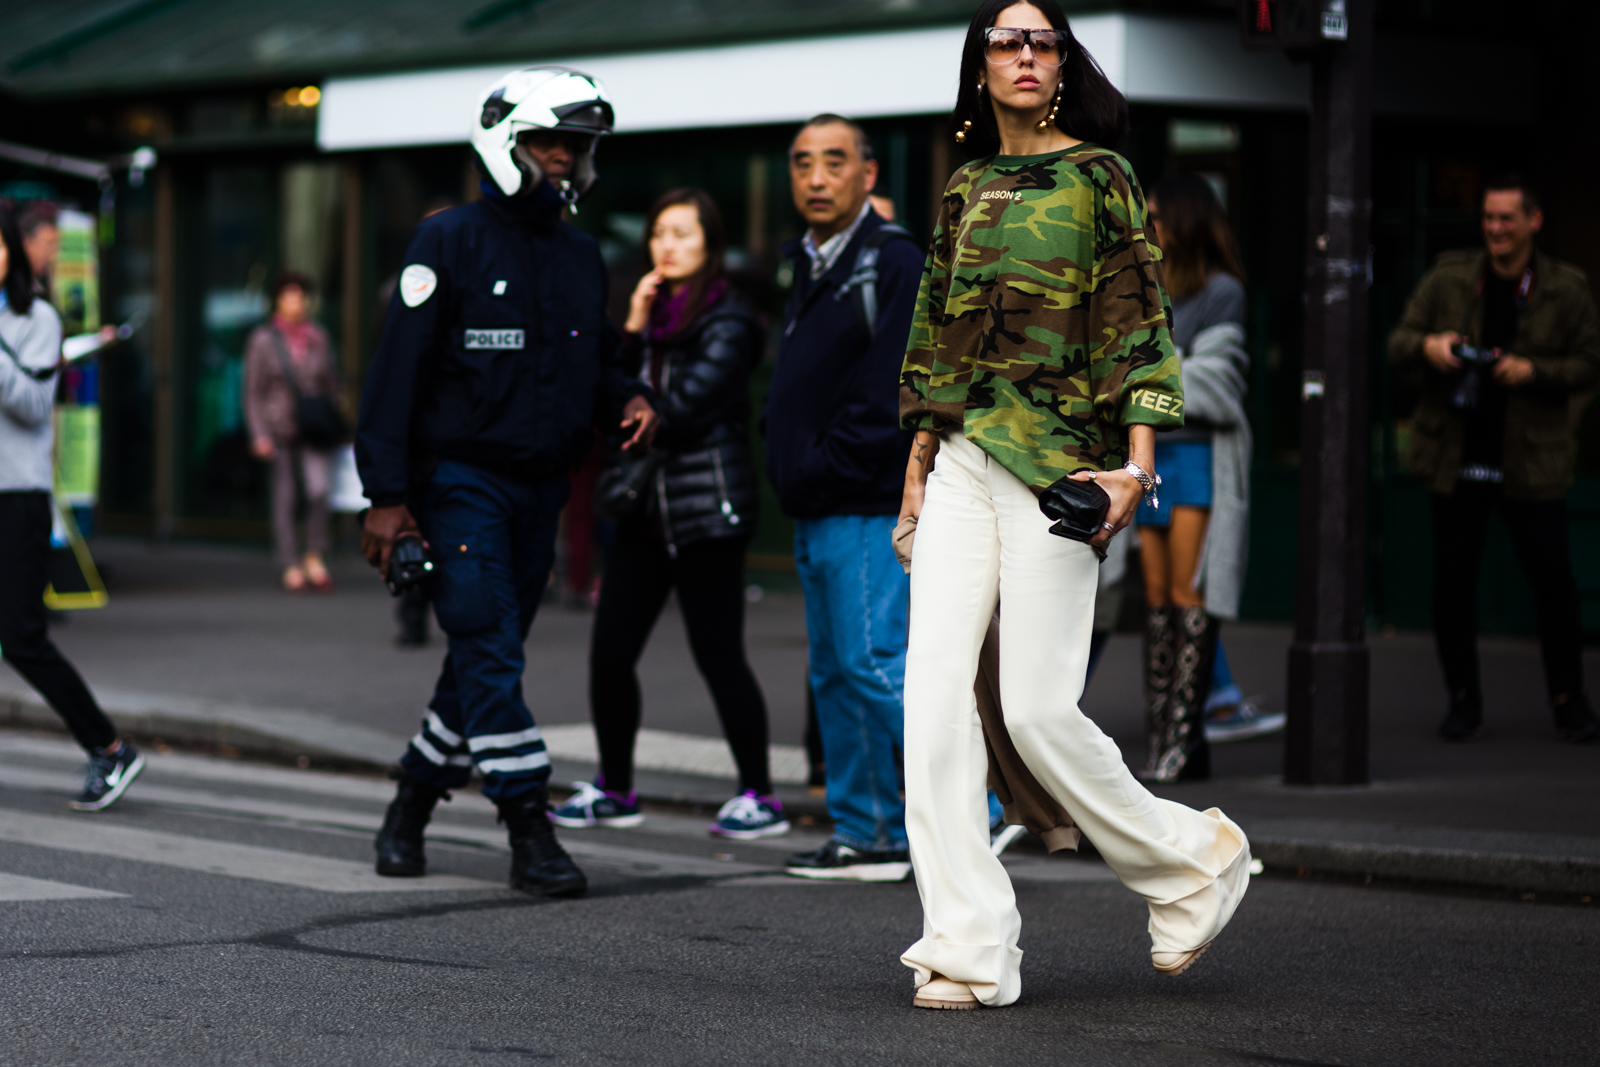 Gilda Ambrosio wearing a Yeezy camouflage t-shirt and white pants after the Stella McCartney fashion show in Paris, France